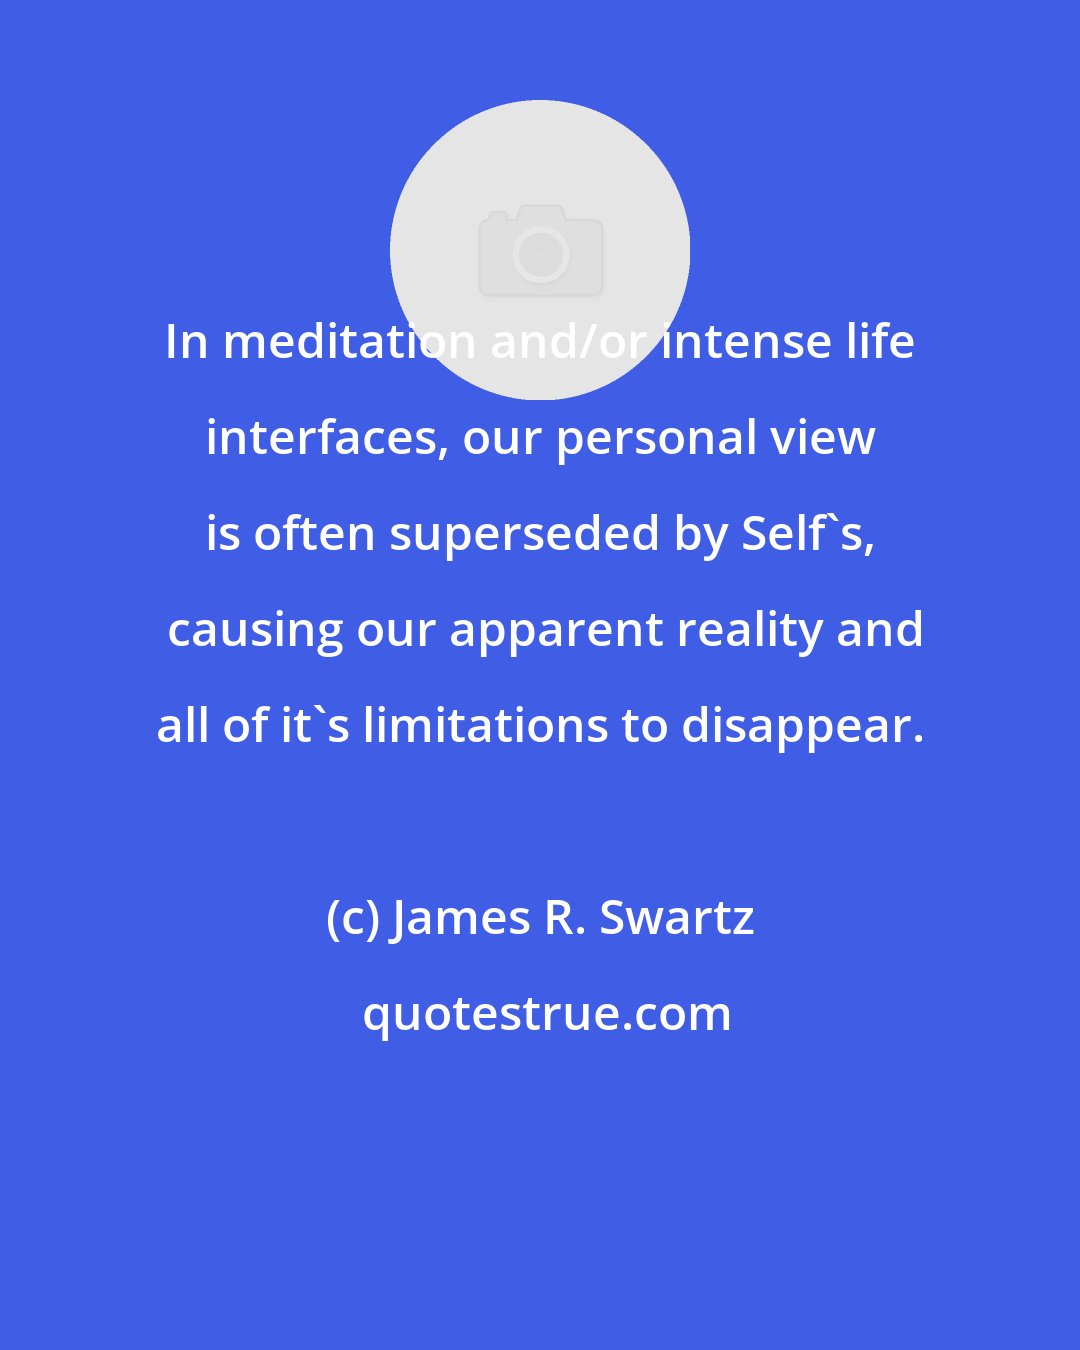 James R. Swartz: In meditation and/or intense life interfaces, our personal view is often superseded by Self's,  causing our apparent reality and all of it's limitations to disappear.